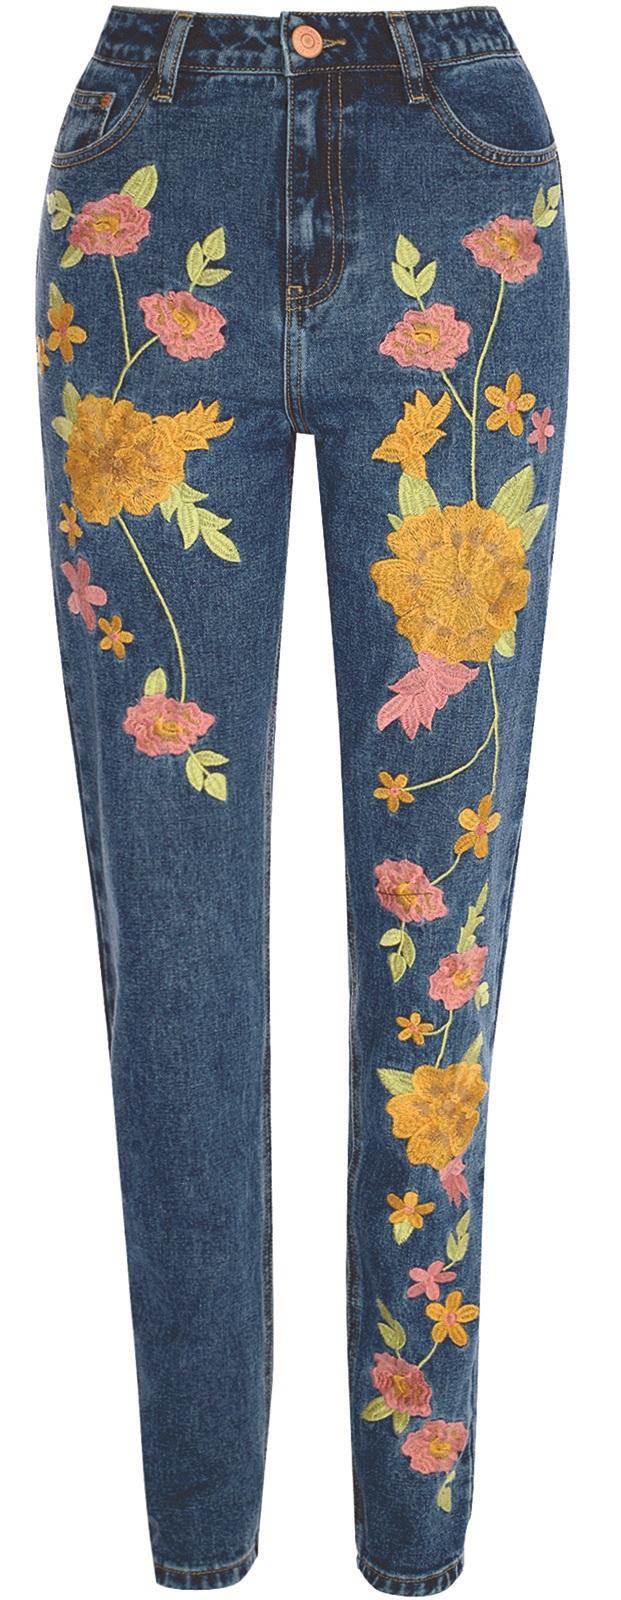 Glamorous, Mid Blue Floral Embroidered Jeans, £40